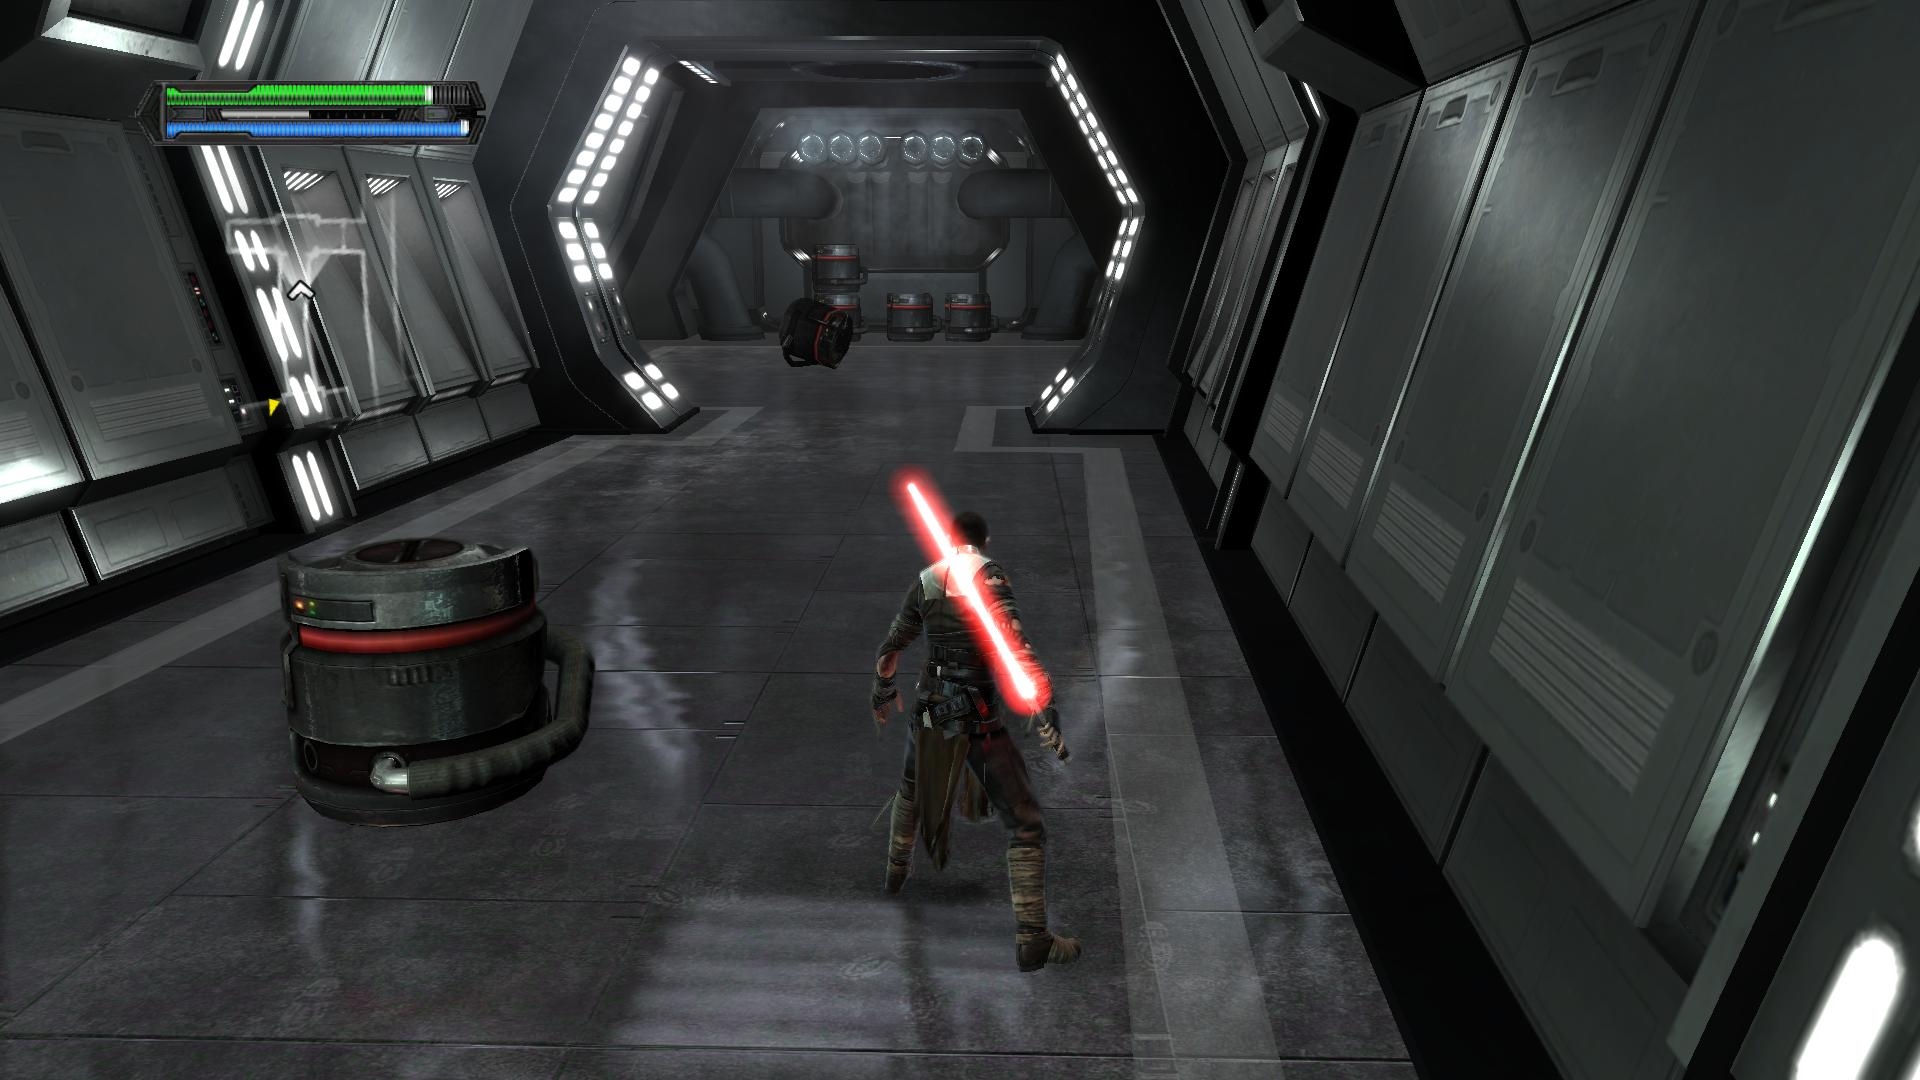 Star wars 1 игра. Star Wars: the Force unleashed - Ultimate Sith Edition. Стар ВАРС the Force unleashed 1. Star Wars the Force unleashed 1. Старкиллер Звездные войны игра.